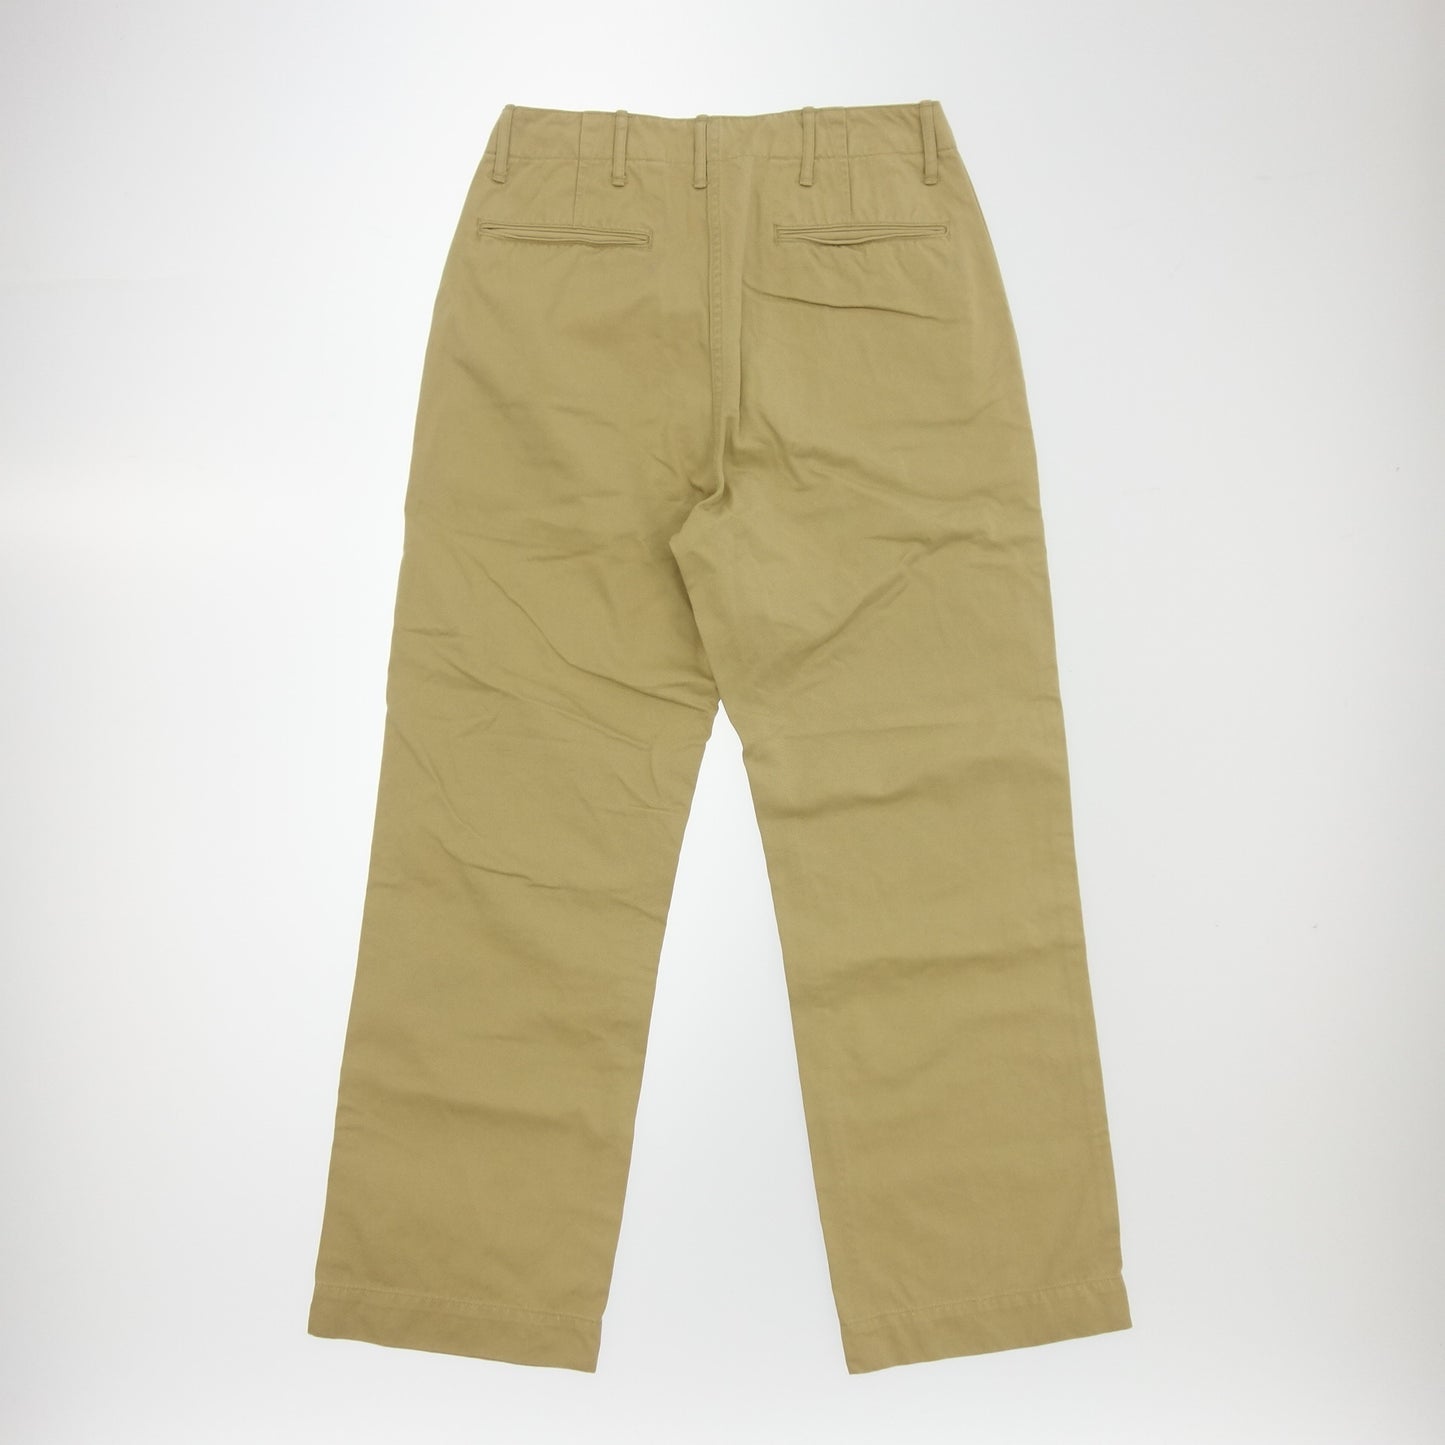 WAREHOUSE DUCK DIGGER Chino Trousers Men's M Beige WAREHOUSE [AFB34] [Used] 